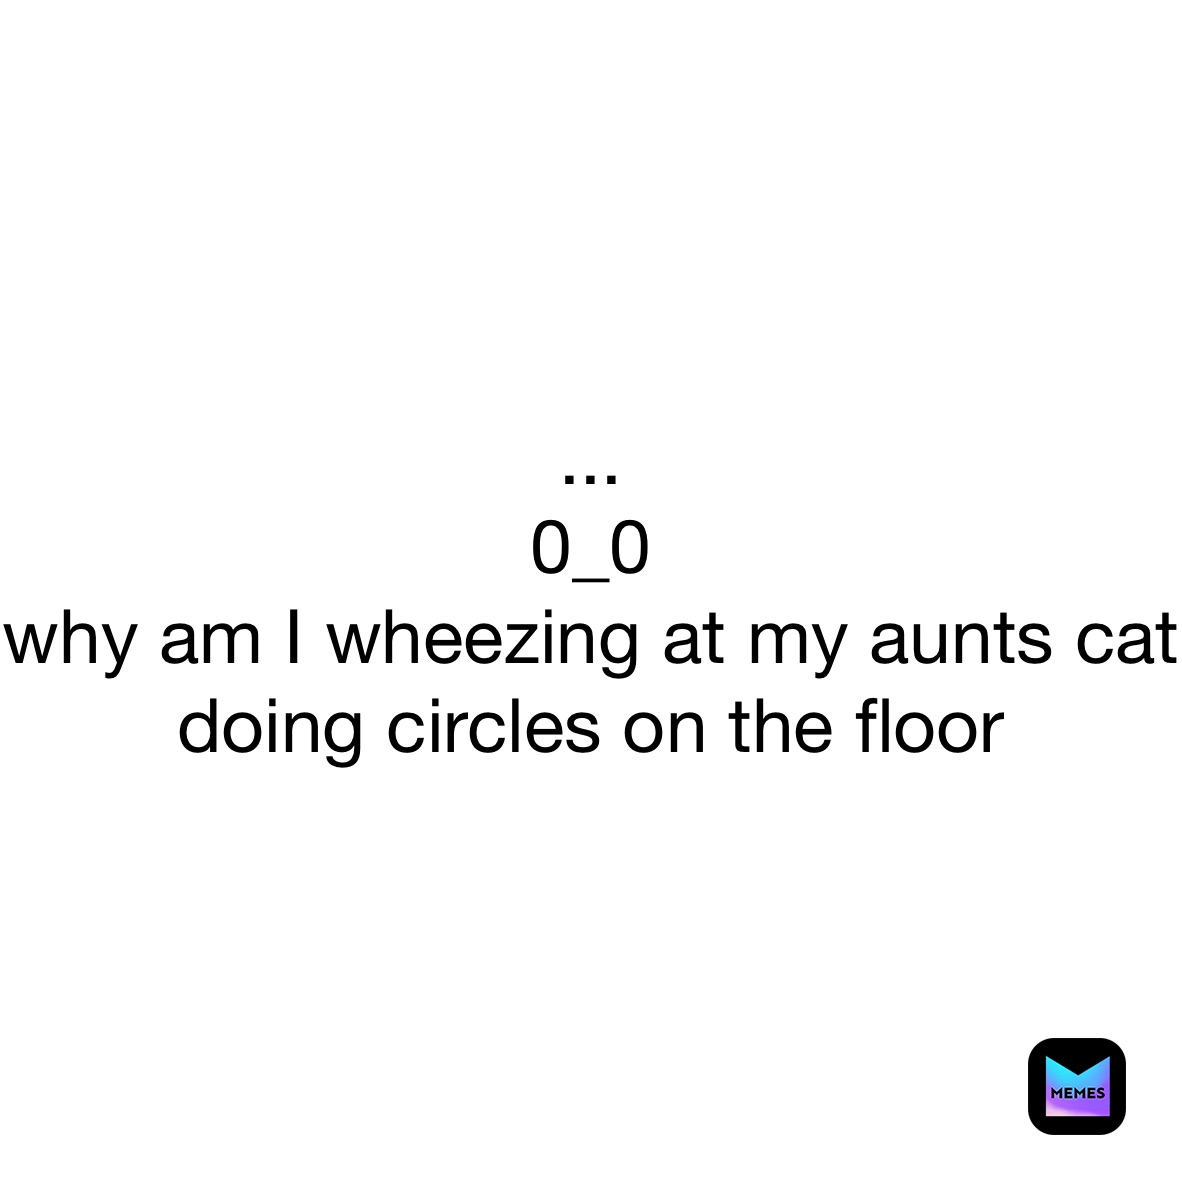 ... 
0_0
why am I wheezing at my aunts cat doing circles on the floor